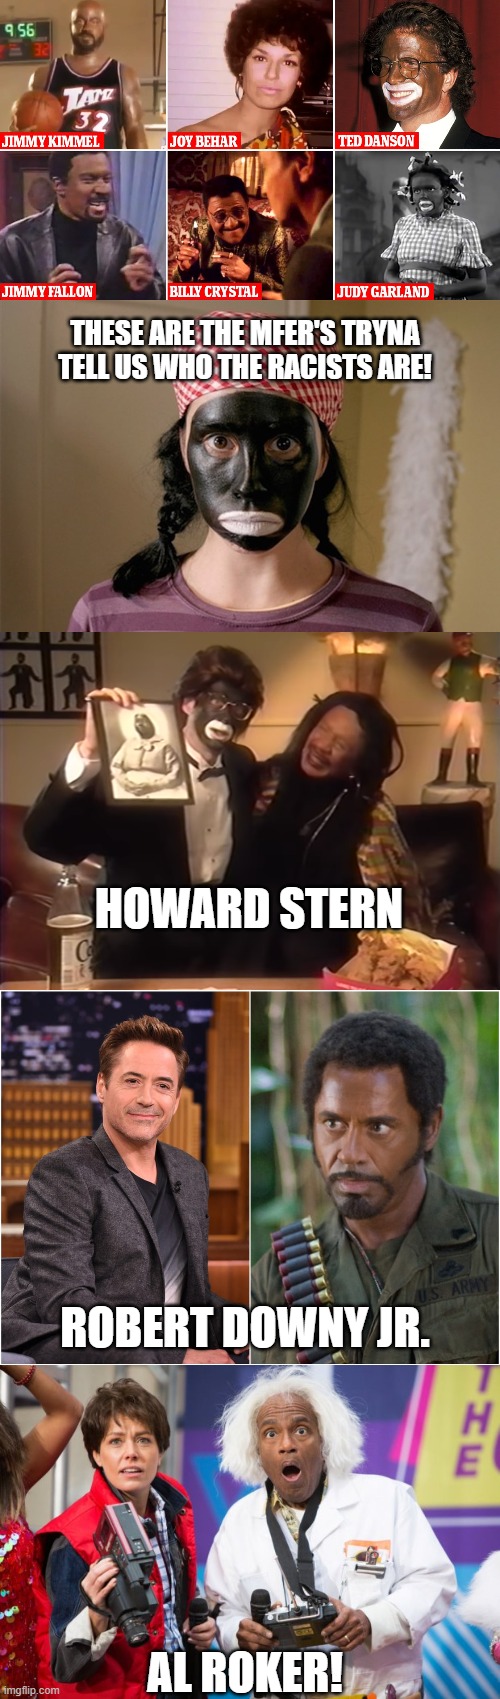 Hollywood wants to call AMERICA RACIST?  Look at THEM FIRST! | THESE ARE THE MFER'S TRYNA TELL US WHO THE RACISTS ARE! HOWARD STERN; ROBERT DOWNY JR. AL ROKER! | image tagged in hollywood liberals | made w/ Imgflip meme maker